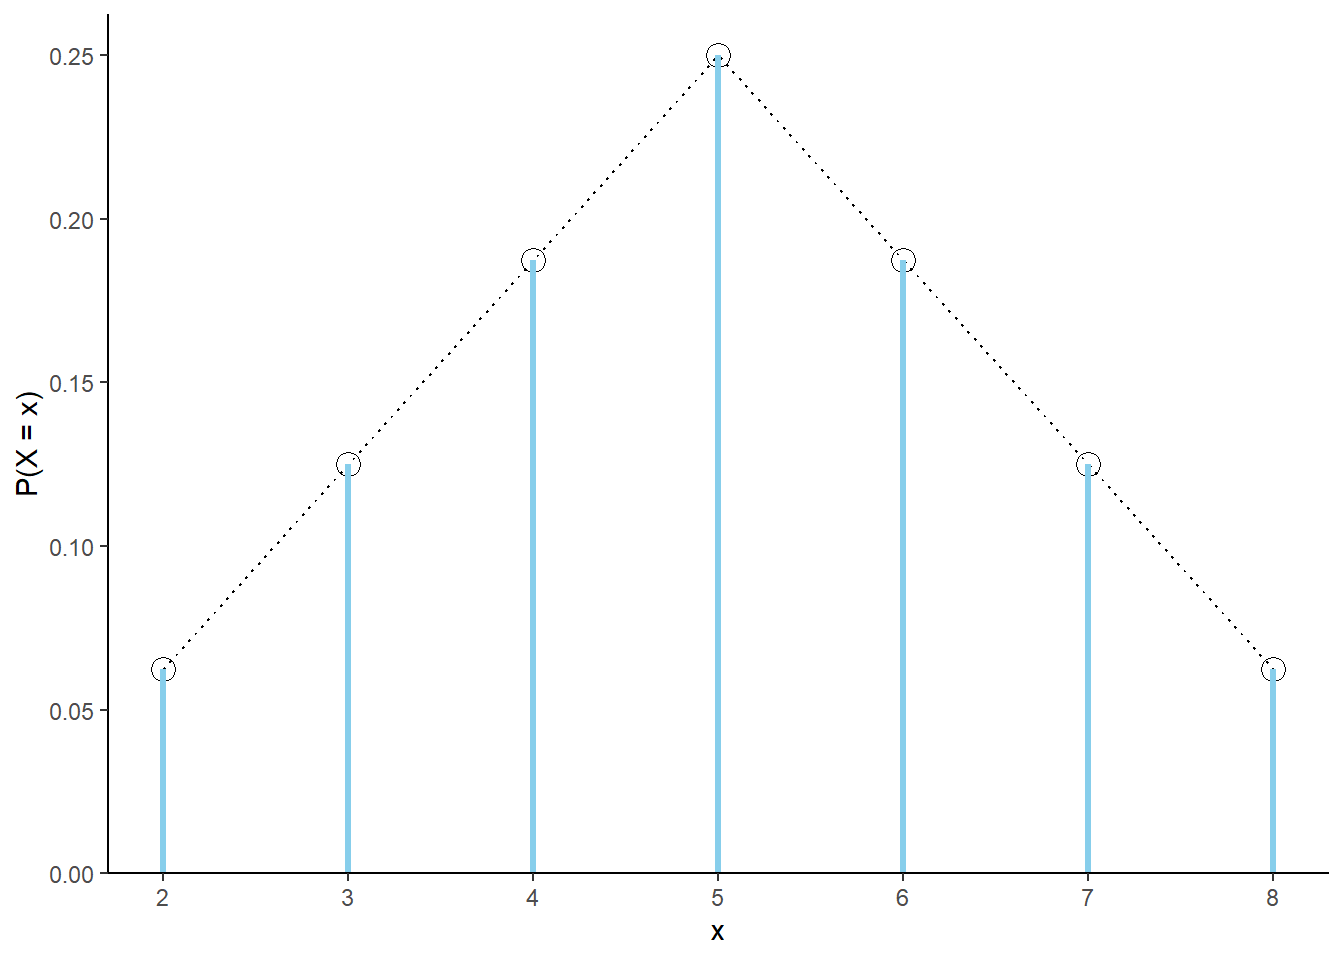 The marginal distribution of \(X\), the sum of two rolls of a fair four-sided die. The black dots represent the marginal probability mass function of \(X\).